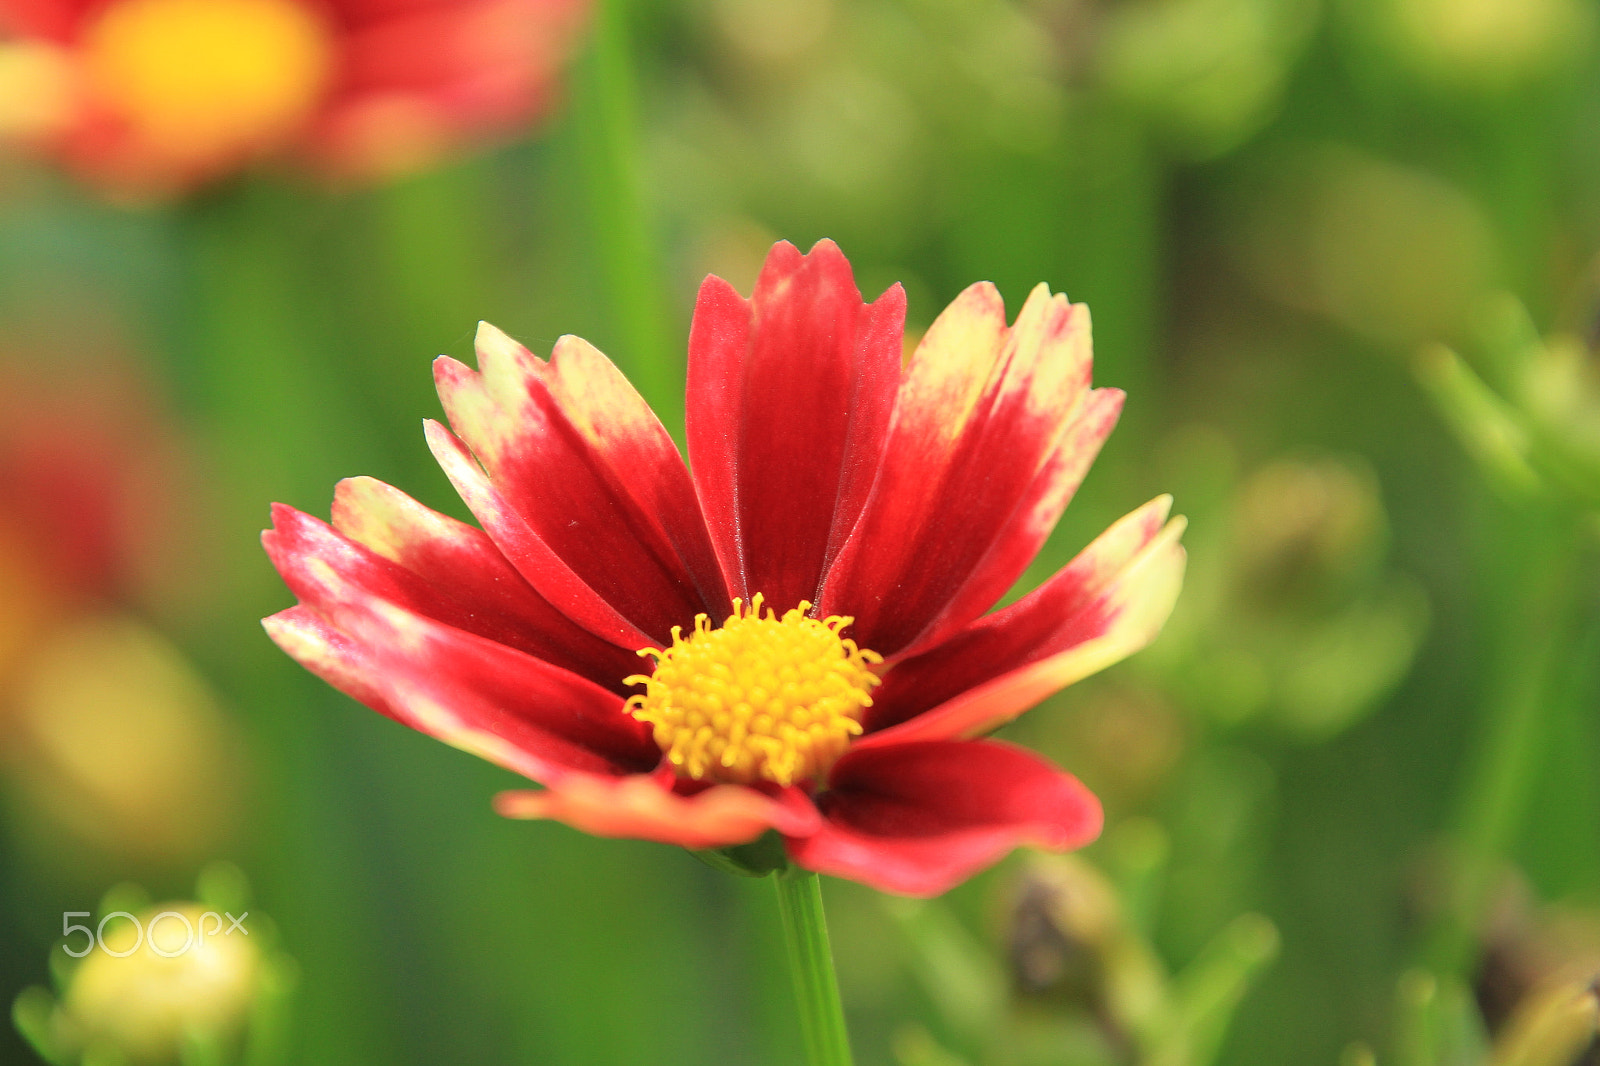 Tamron 16-300mm F3.5-6.3 Di II VC PZD Macro sample photo. Red flower white tips yellow center photography